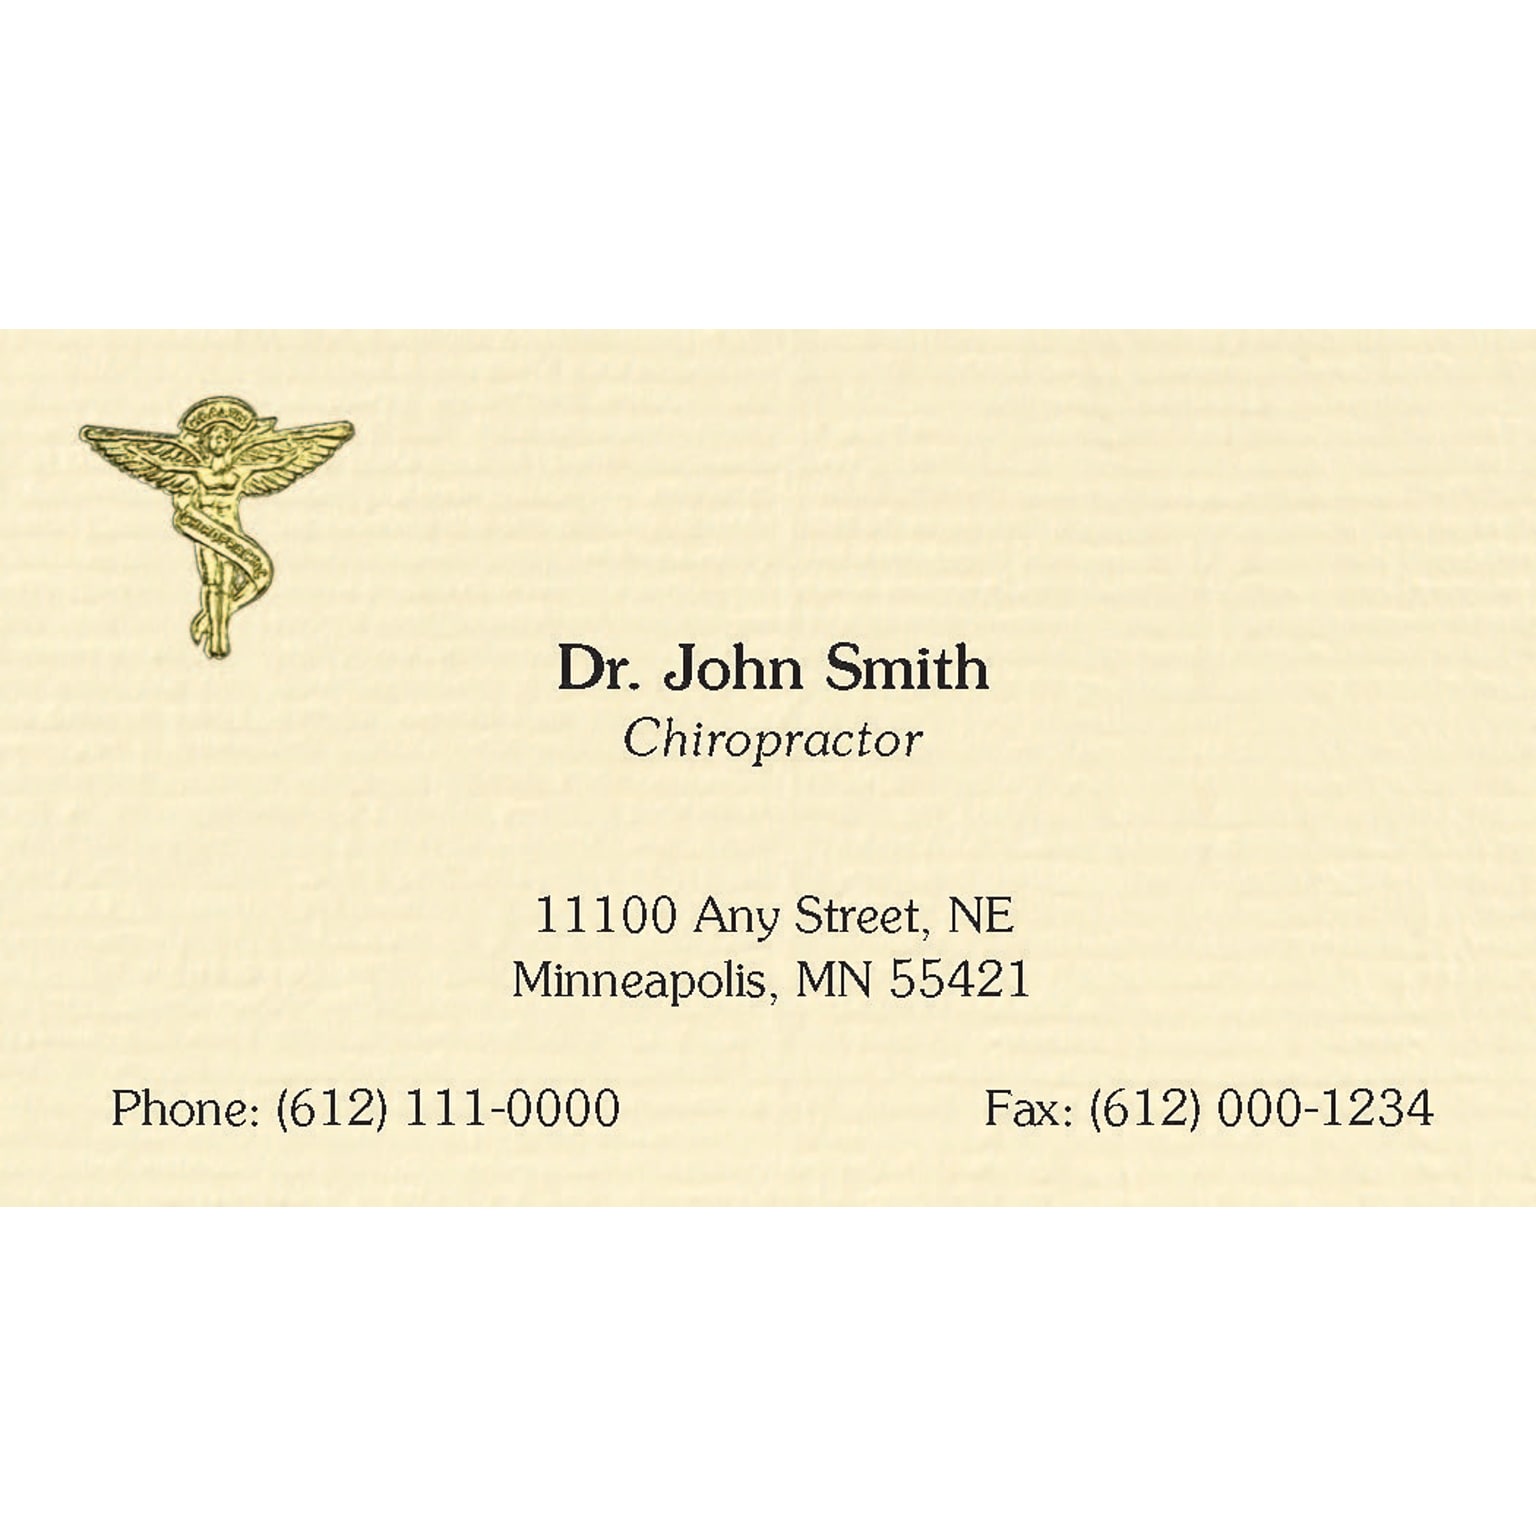 Custom Gold Foil Embossed Business Cards, CLASSIC® Ivory Laid 80#, Raised Ink, 1 Standard Ink, 1-Sided, Logo 207, 250/PK